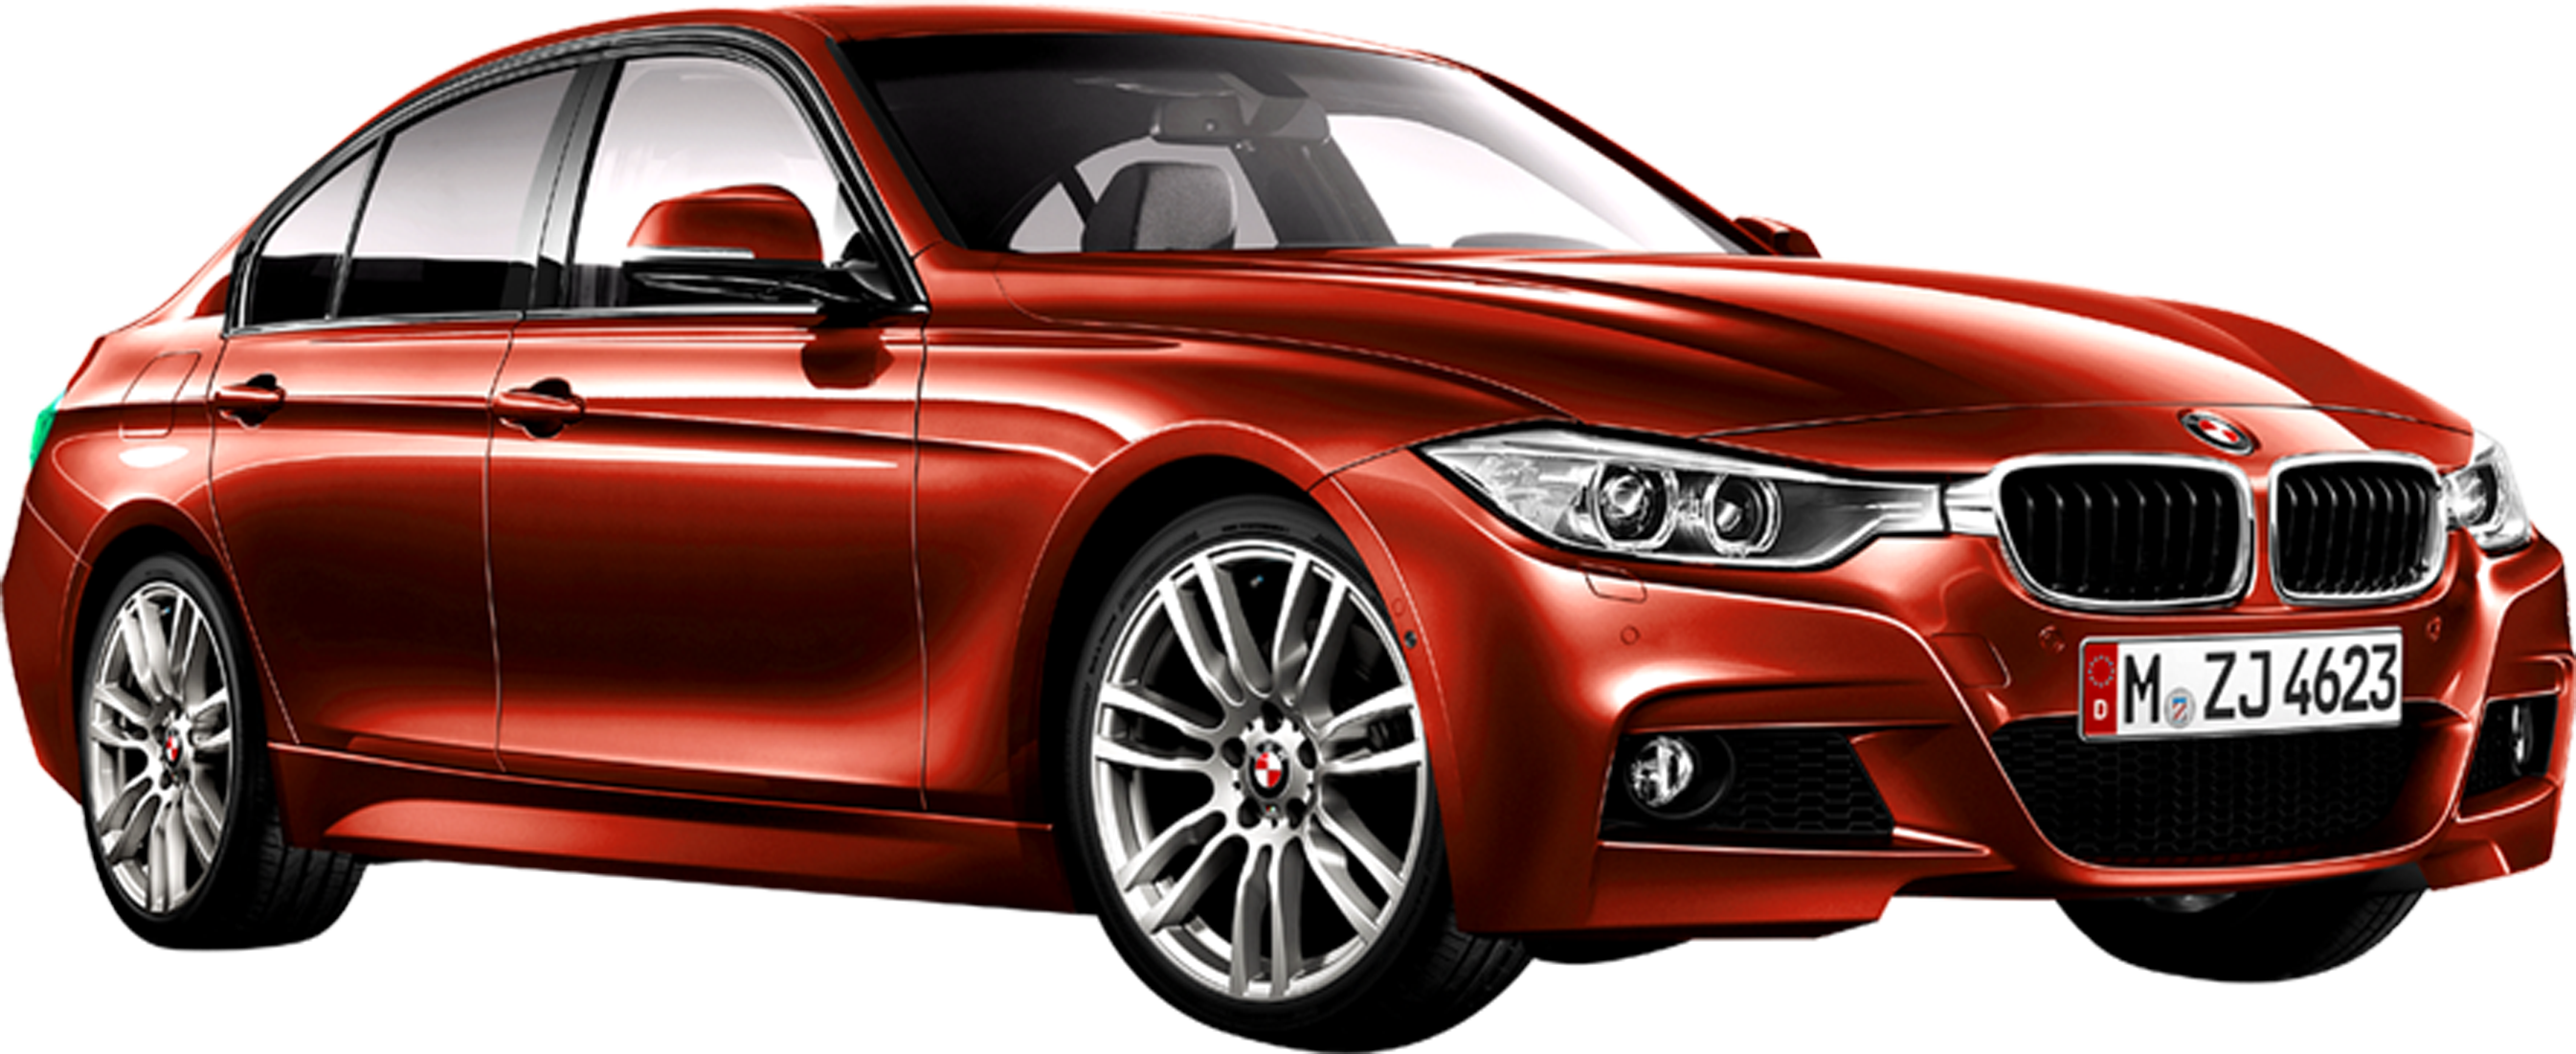 red bmw png